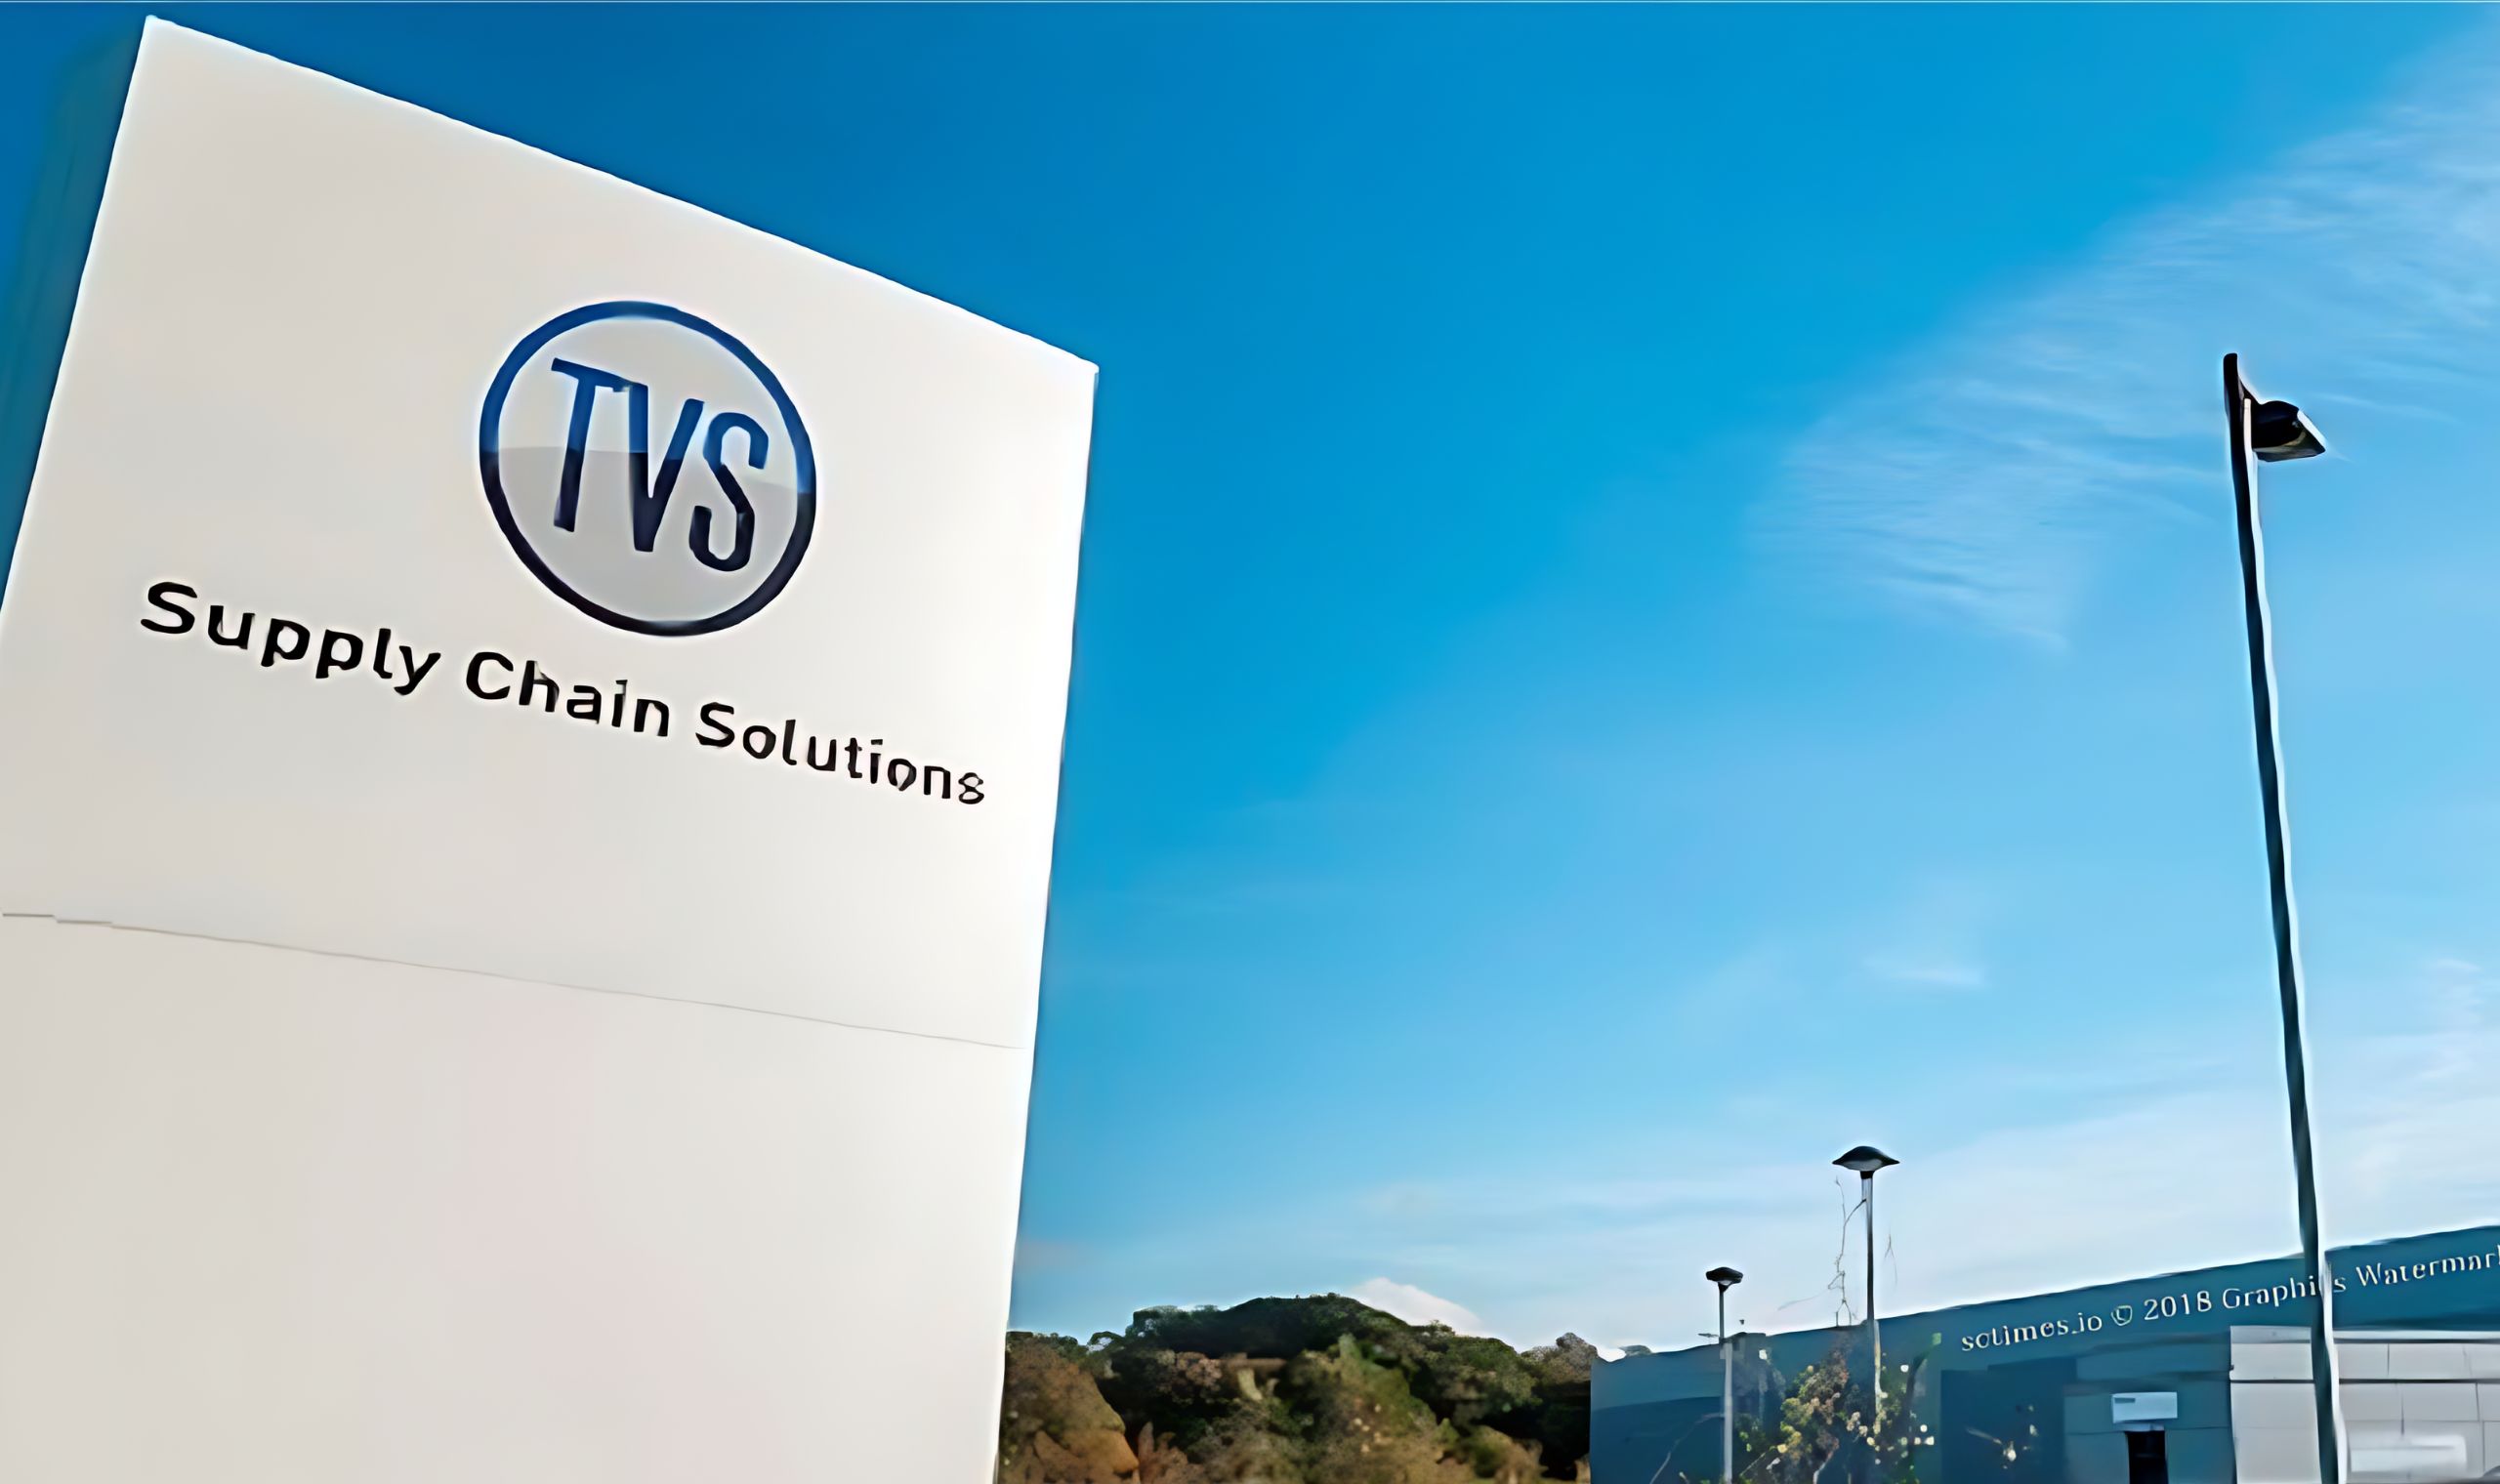 TVS Supply Chain Solutions Goes Up By 8% After Contract With Daimler Truck